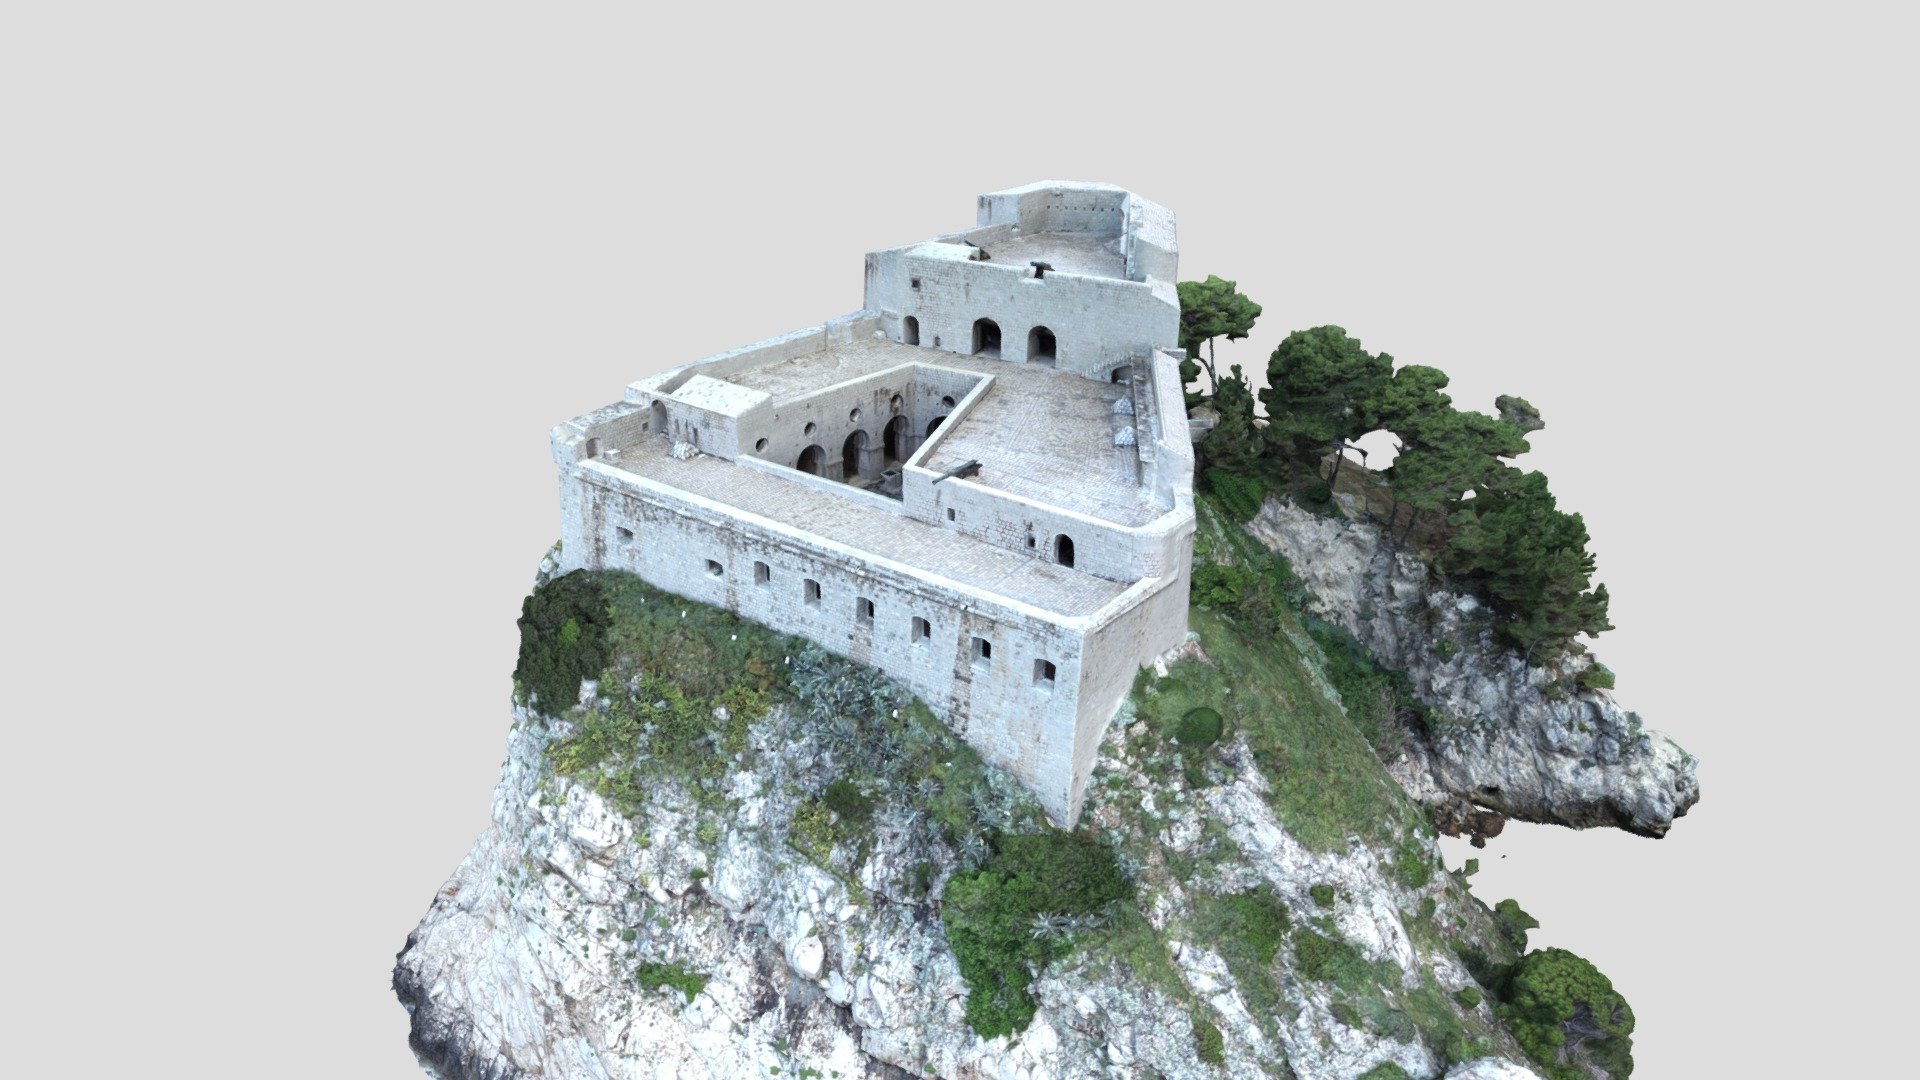 The fort raises on the 37-metre high sea cliff outside the city walls. The people of Dubrovnik built the fort in order to protect the western sea access to the City, particularly from the Venetian fleet. The construction began in 1018 and was completed in the 16th century. The thickness of the walls facing the sea is between 4 and 12 metres. Above the entrance is an inscription in Latin language: NON BENE PRO TOTO LIBERTAS VENDITUR AURO (Freedom is not sold for all the gold of the world).

The fort houses a chapel of St. Lawrence, and its courtyard with a cistern serves as a magical venue for theatrical performances. A large number of plays has been performed here within the Dubrovnik Summer Festival programme. Compared with Elsinore, Lovrijenac Fort has become the perfect world famous setting for Shakespeares Hamlet. The fort is opened for visitors 3d model